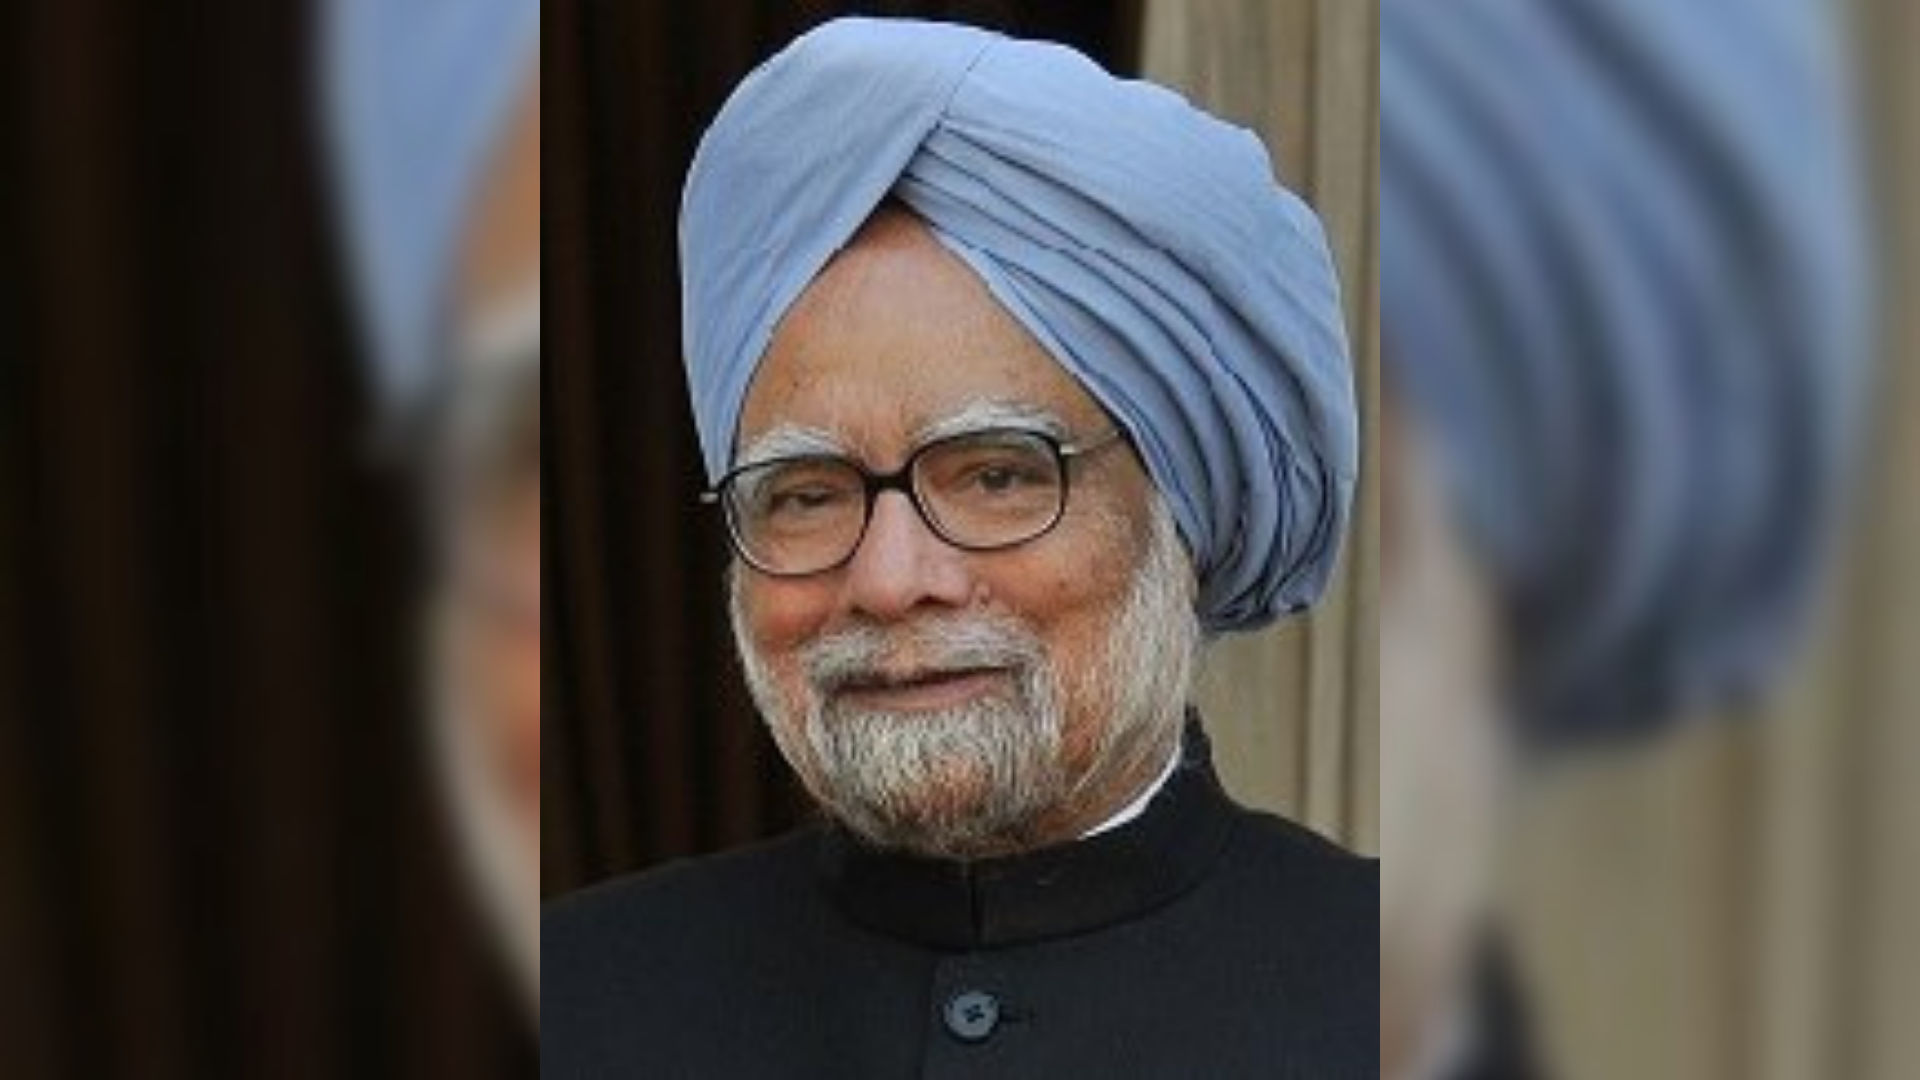 Manmohan Singh in hospital with Covid: PM, Rahul Gandhi wish ‘speedy recovery’